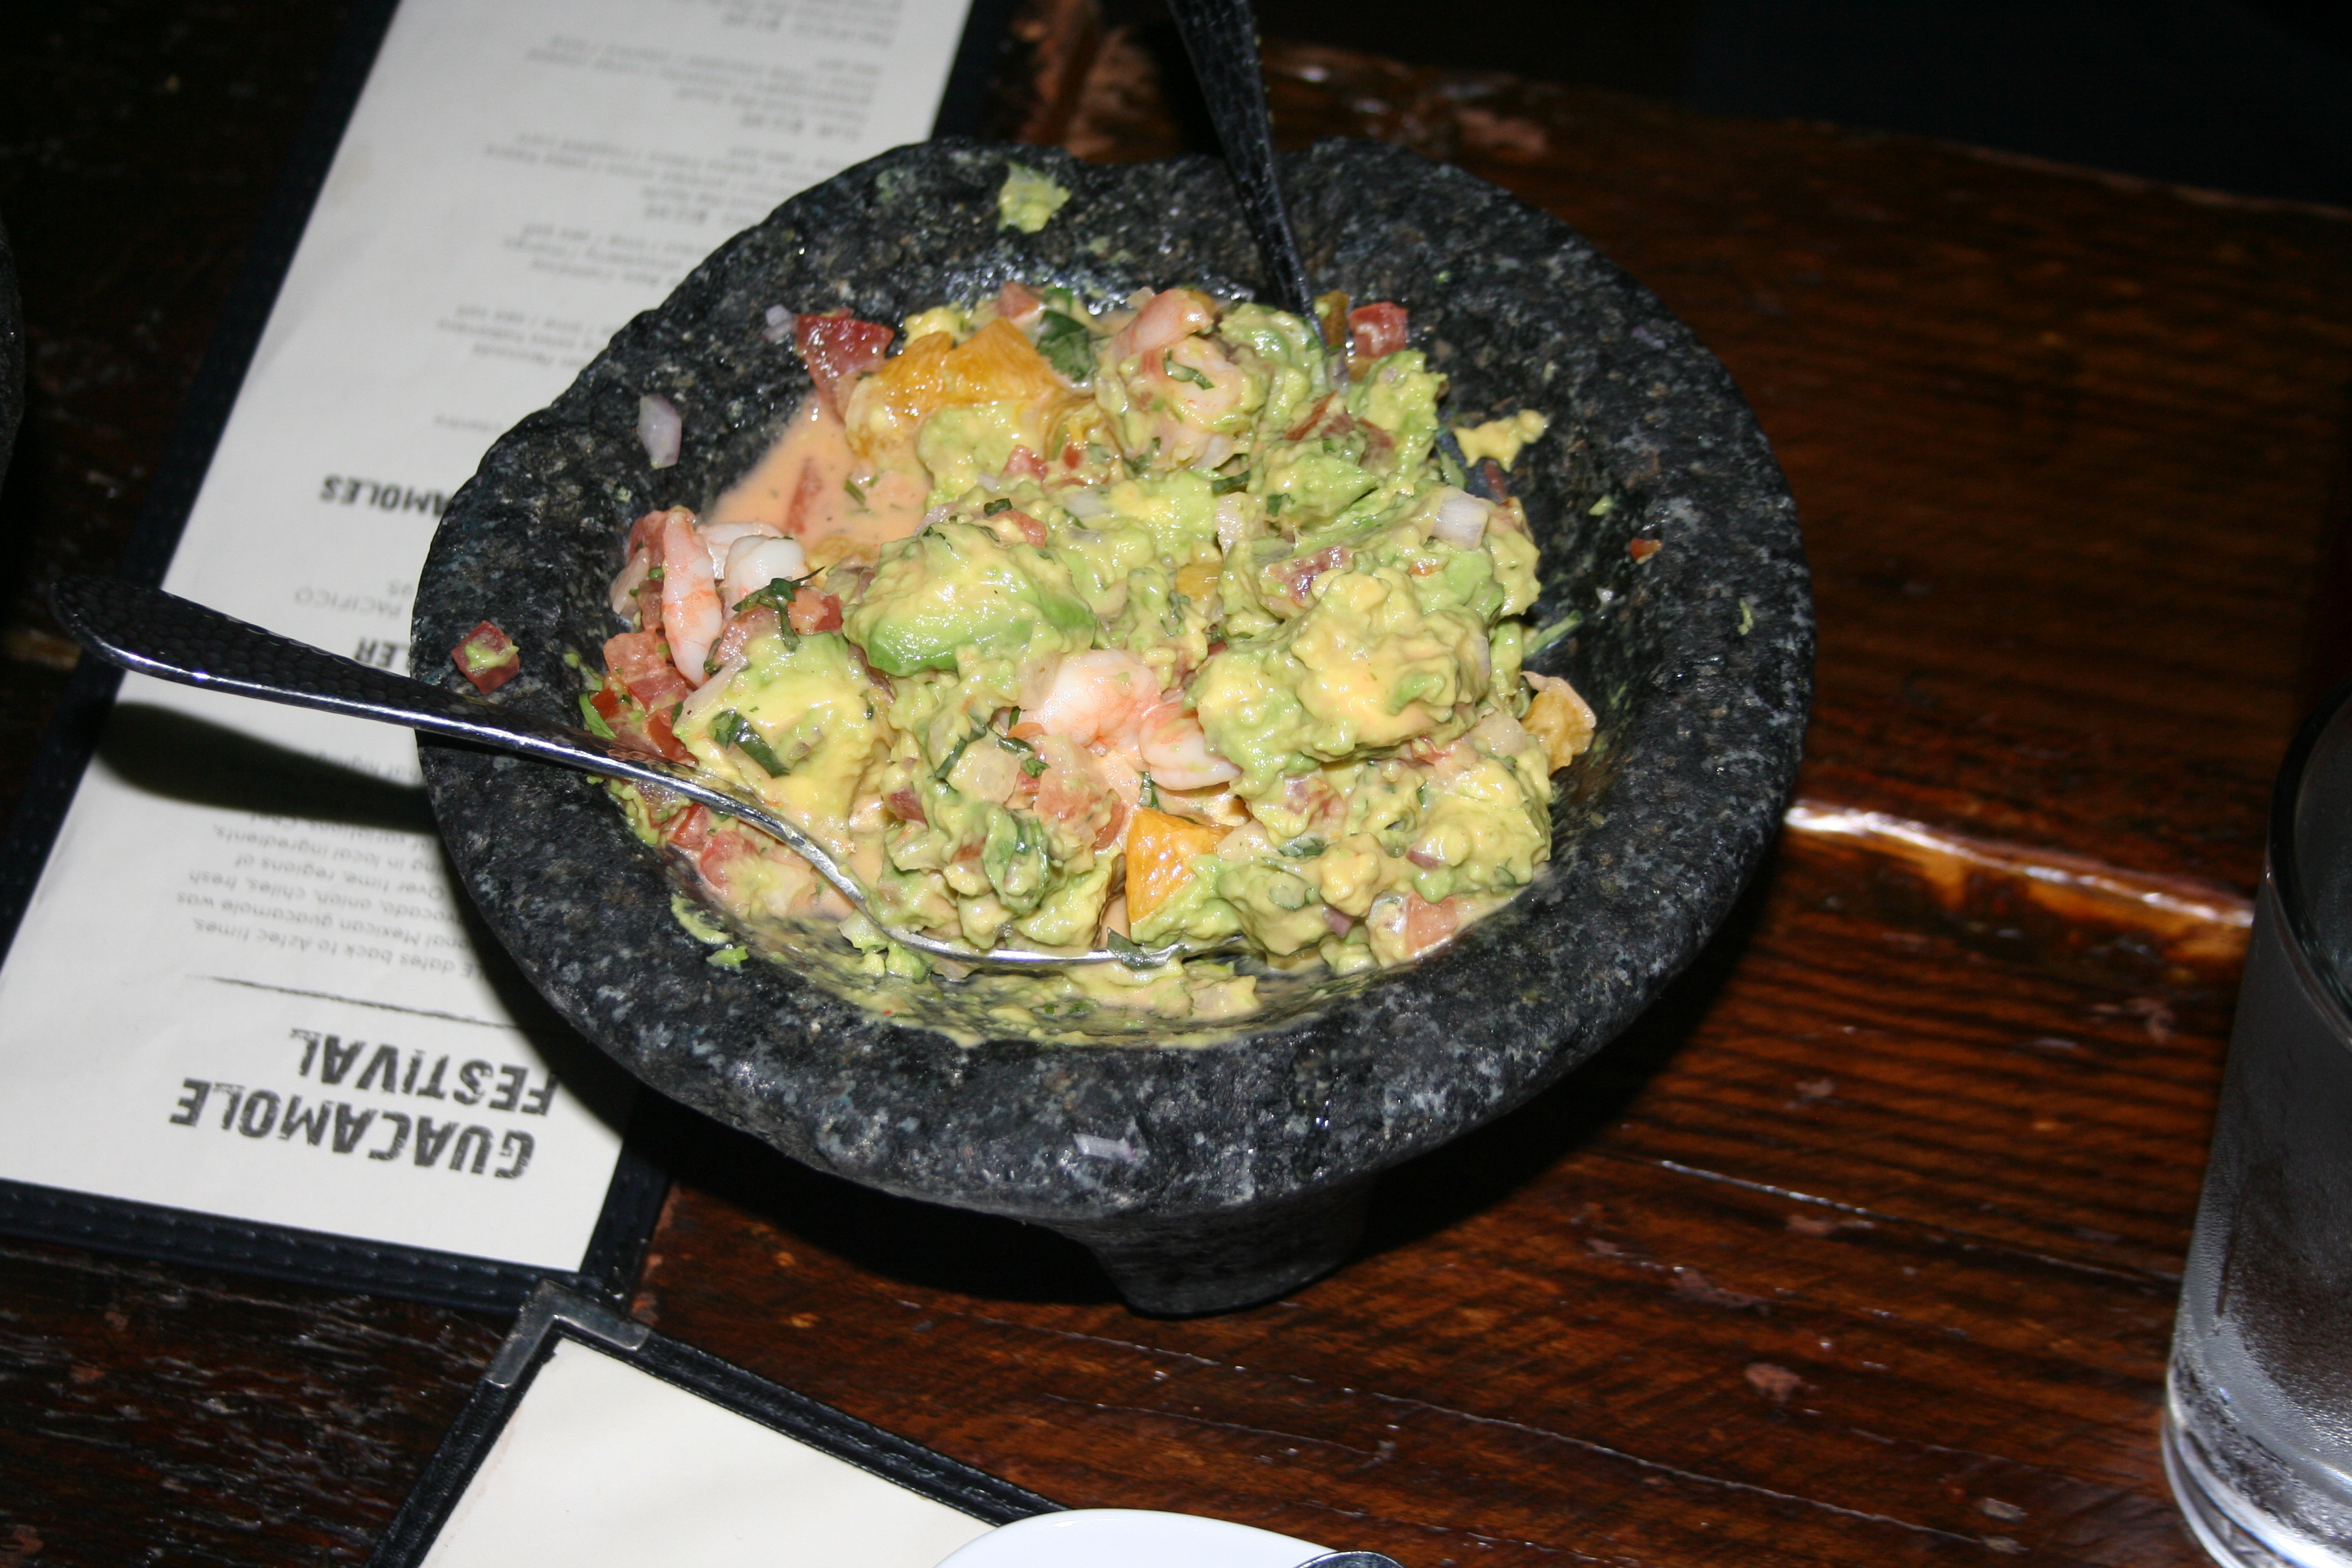 The Yucatan guacamole with shrimp ceviche is one of the specials offered during El Centro D.F.'s guacamole festival. (Photo: Mark Heckathorn/DC on Heels)